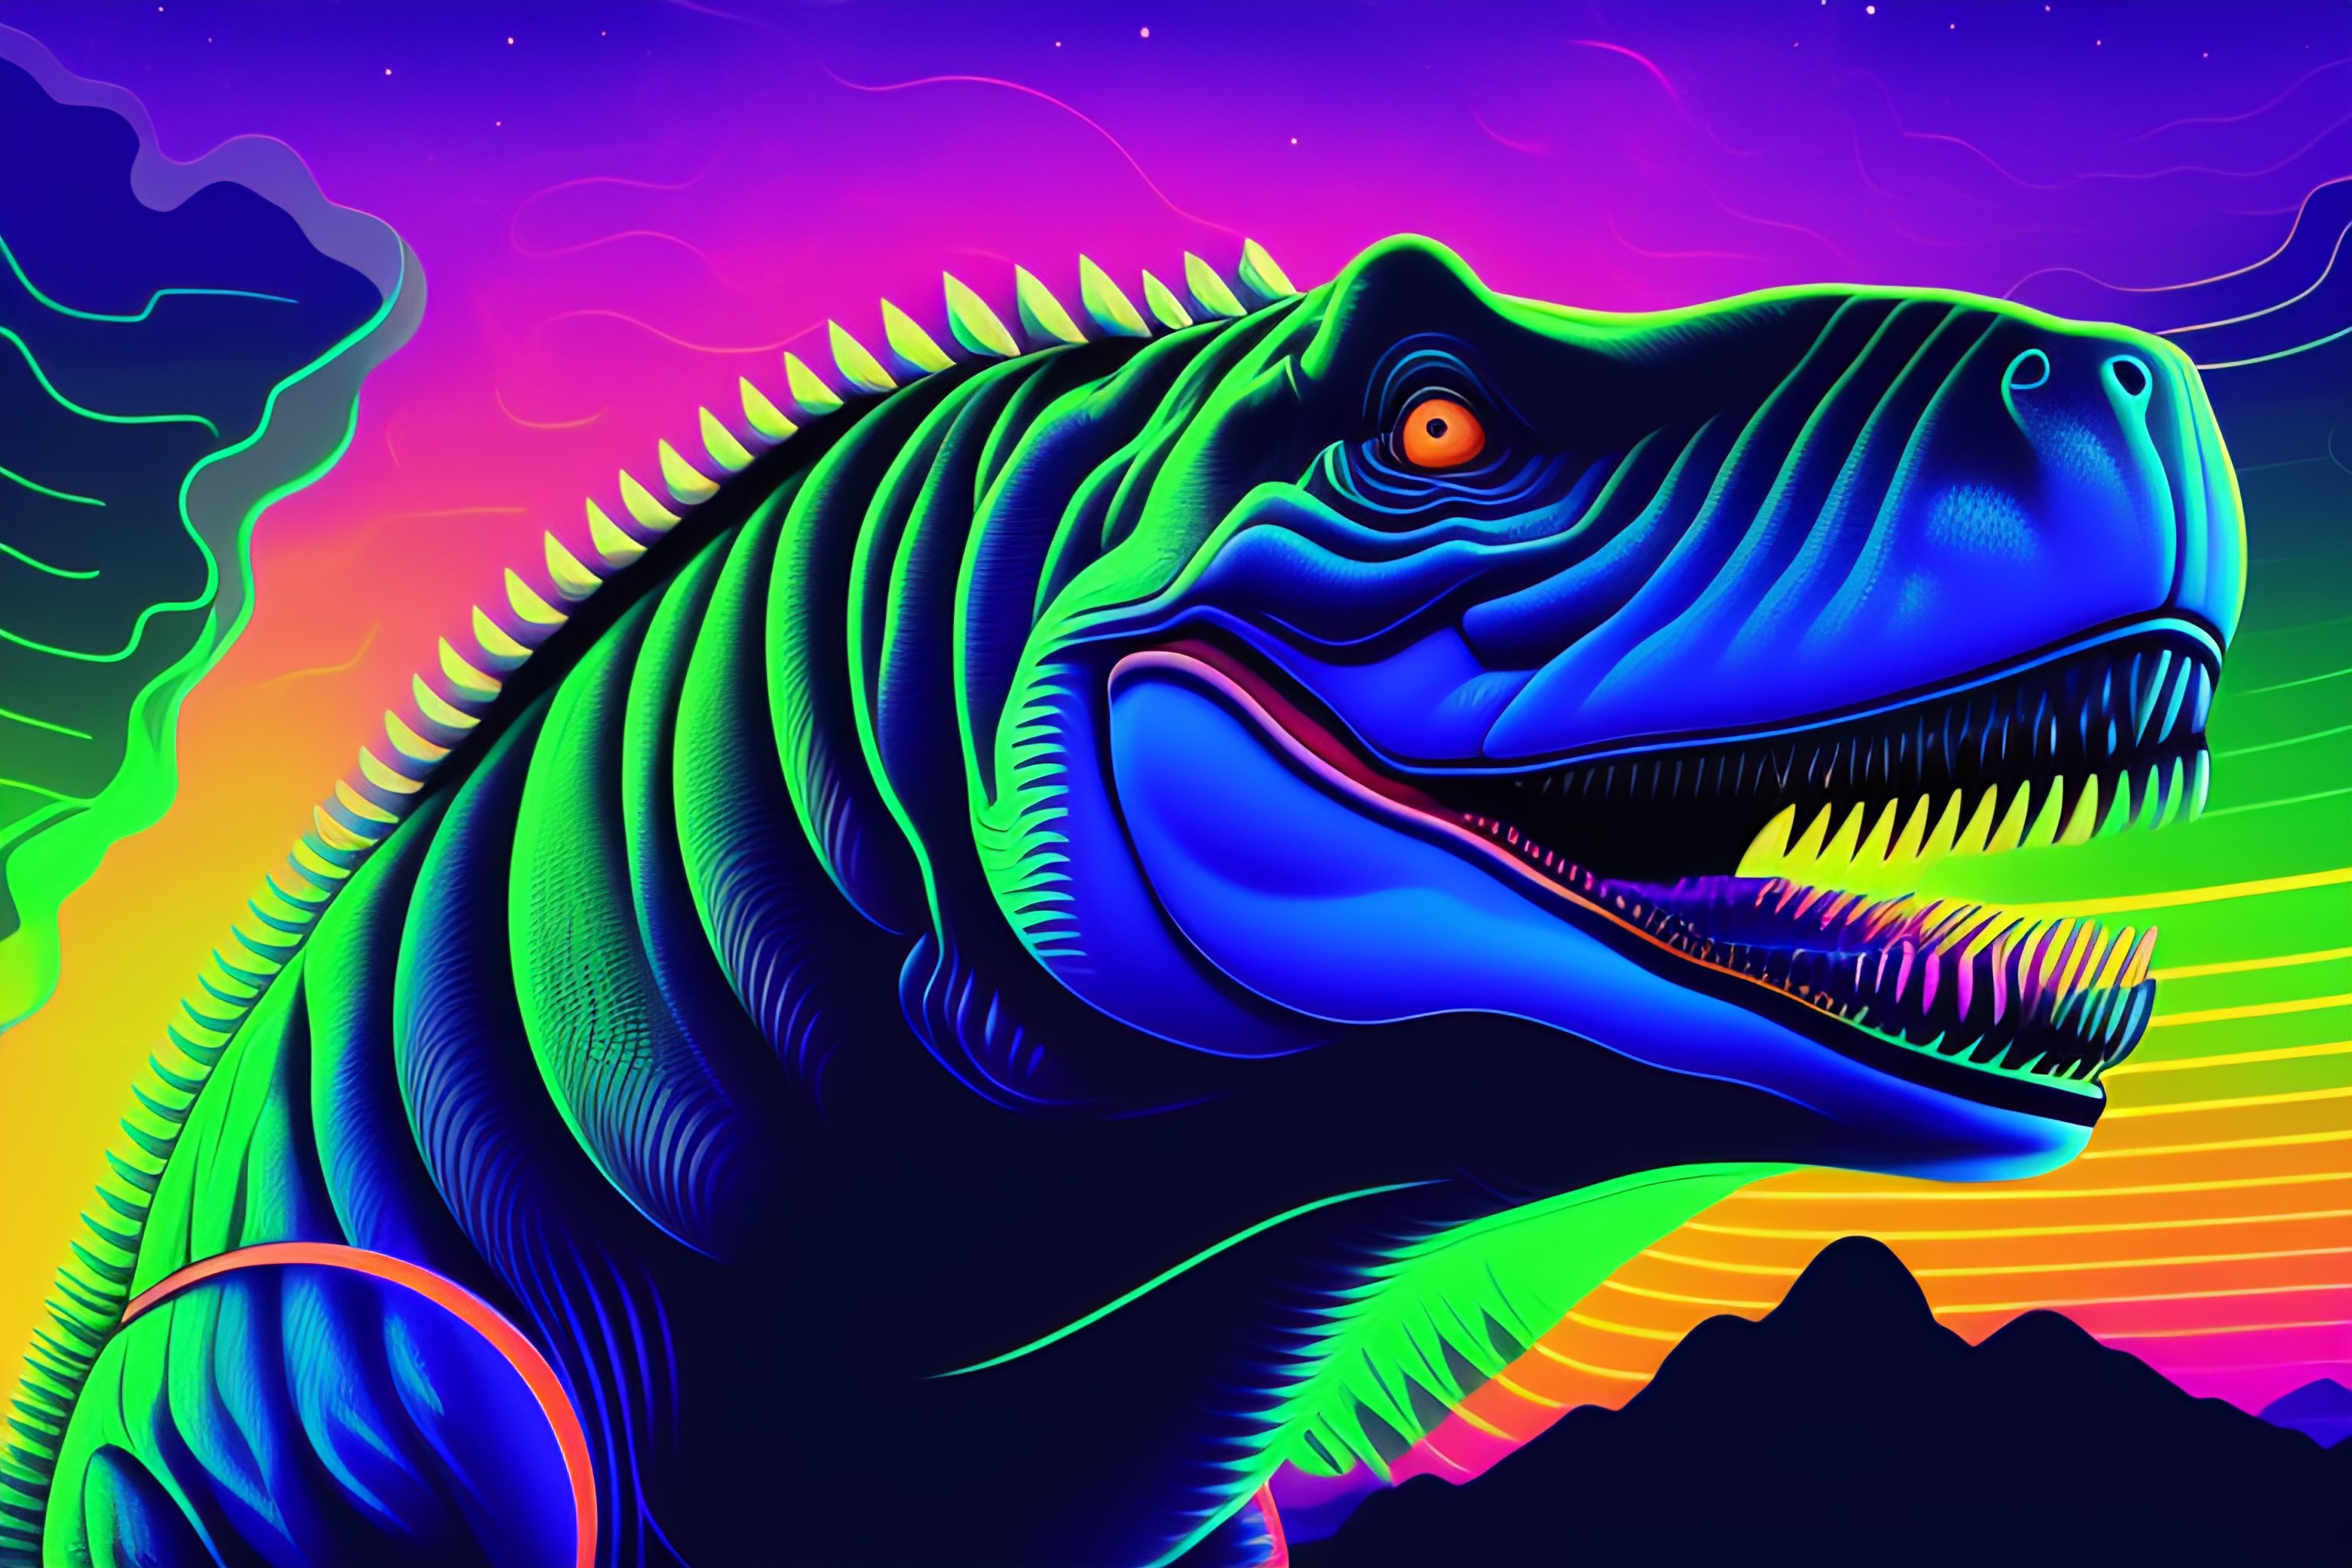 Lexica - Synthwave style vector art, horizontal neon lines ...